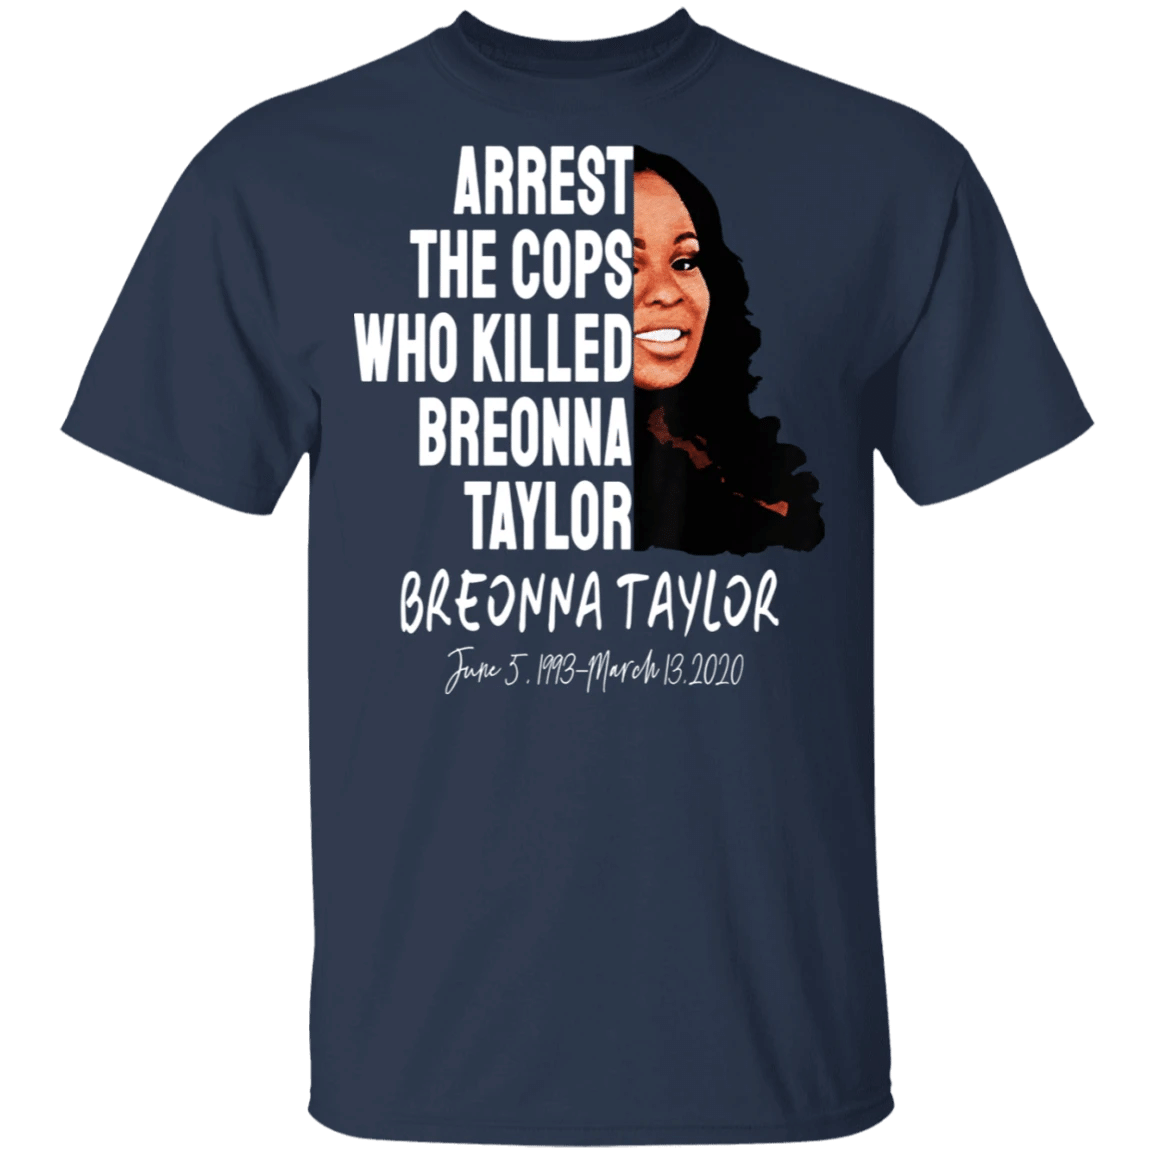 Arrest The Cops That Killed Breonna T-Shirt No Justice No Peace Shirt Justice For Breonna